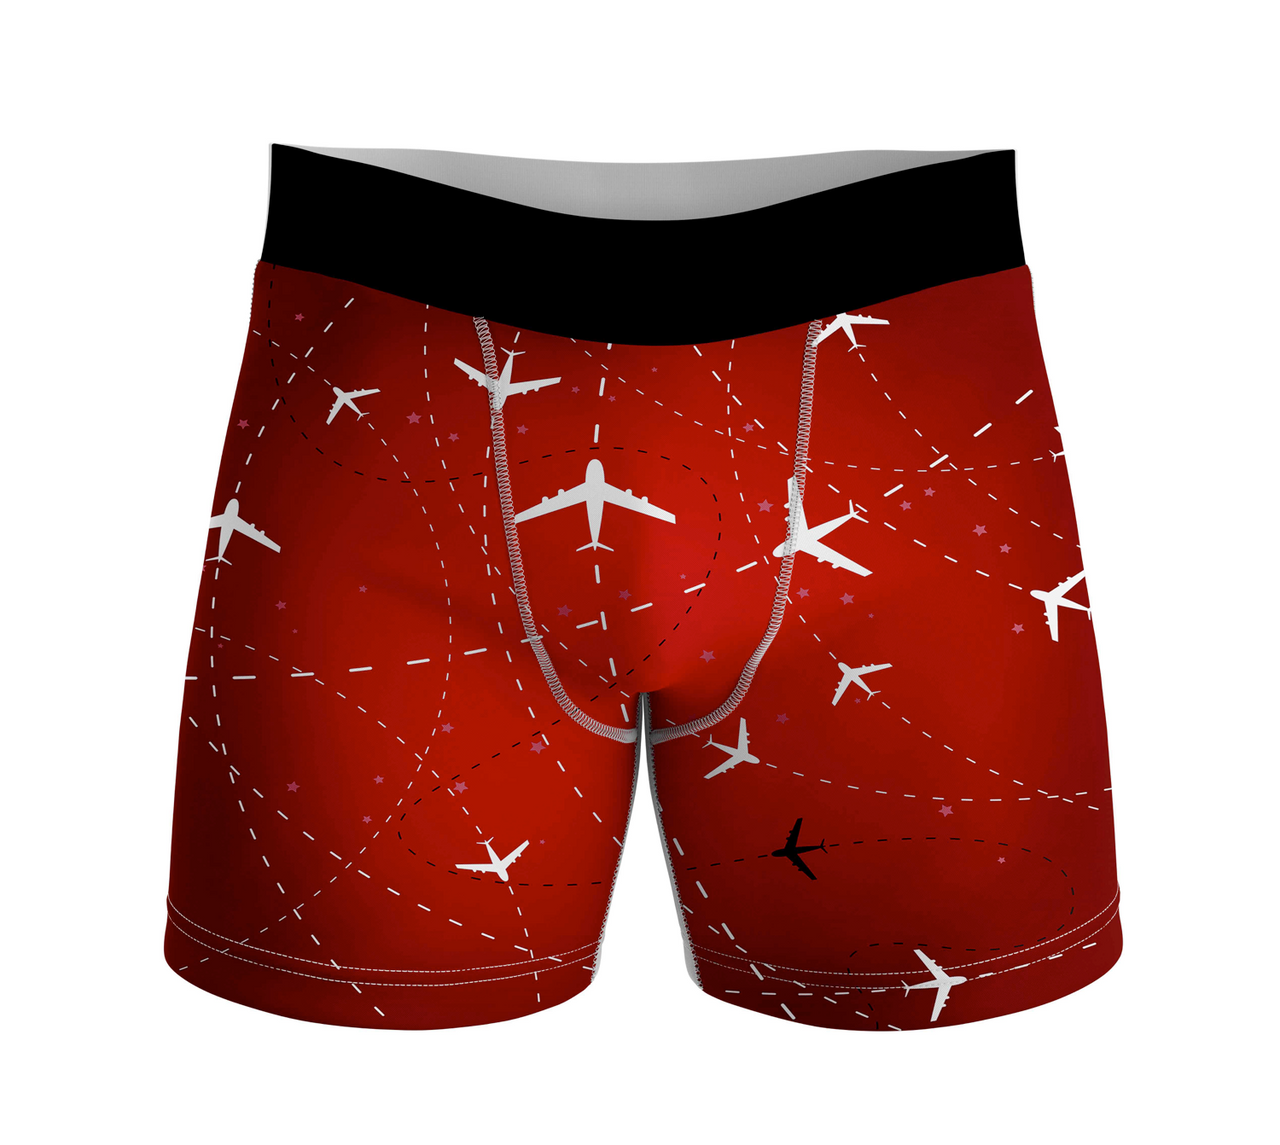 Travelling with Aircraft Designed Men Boxers